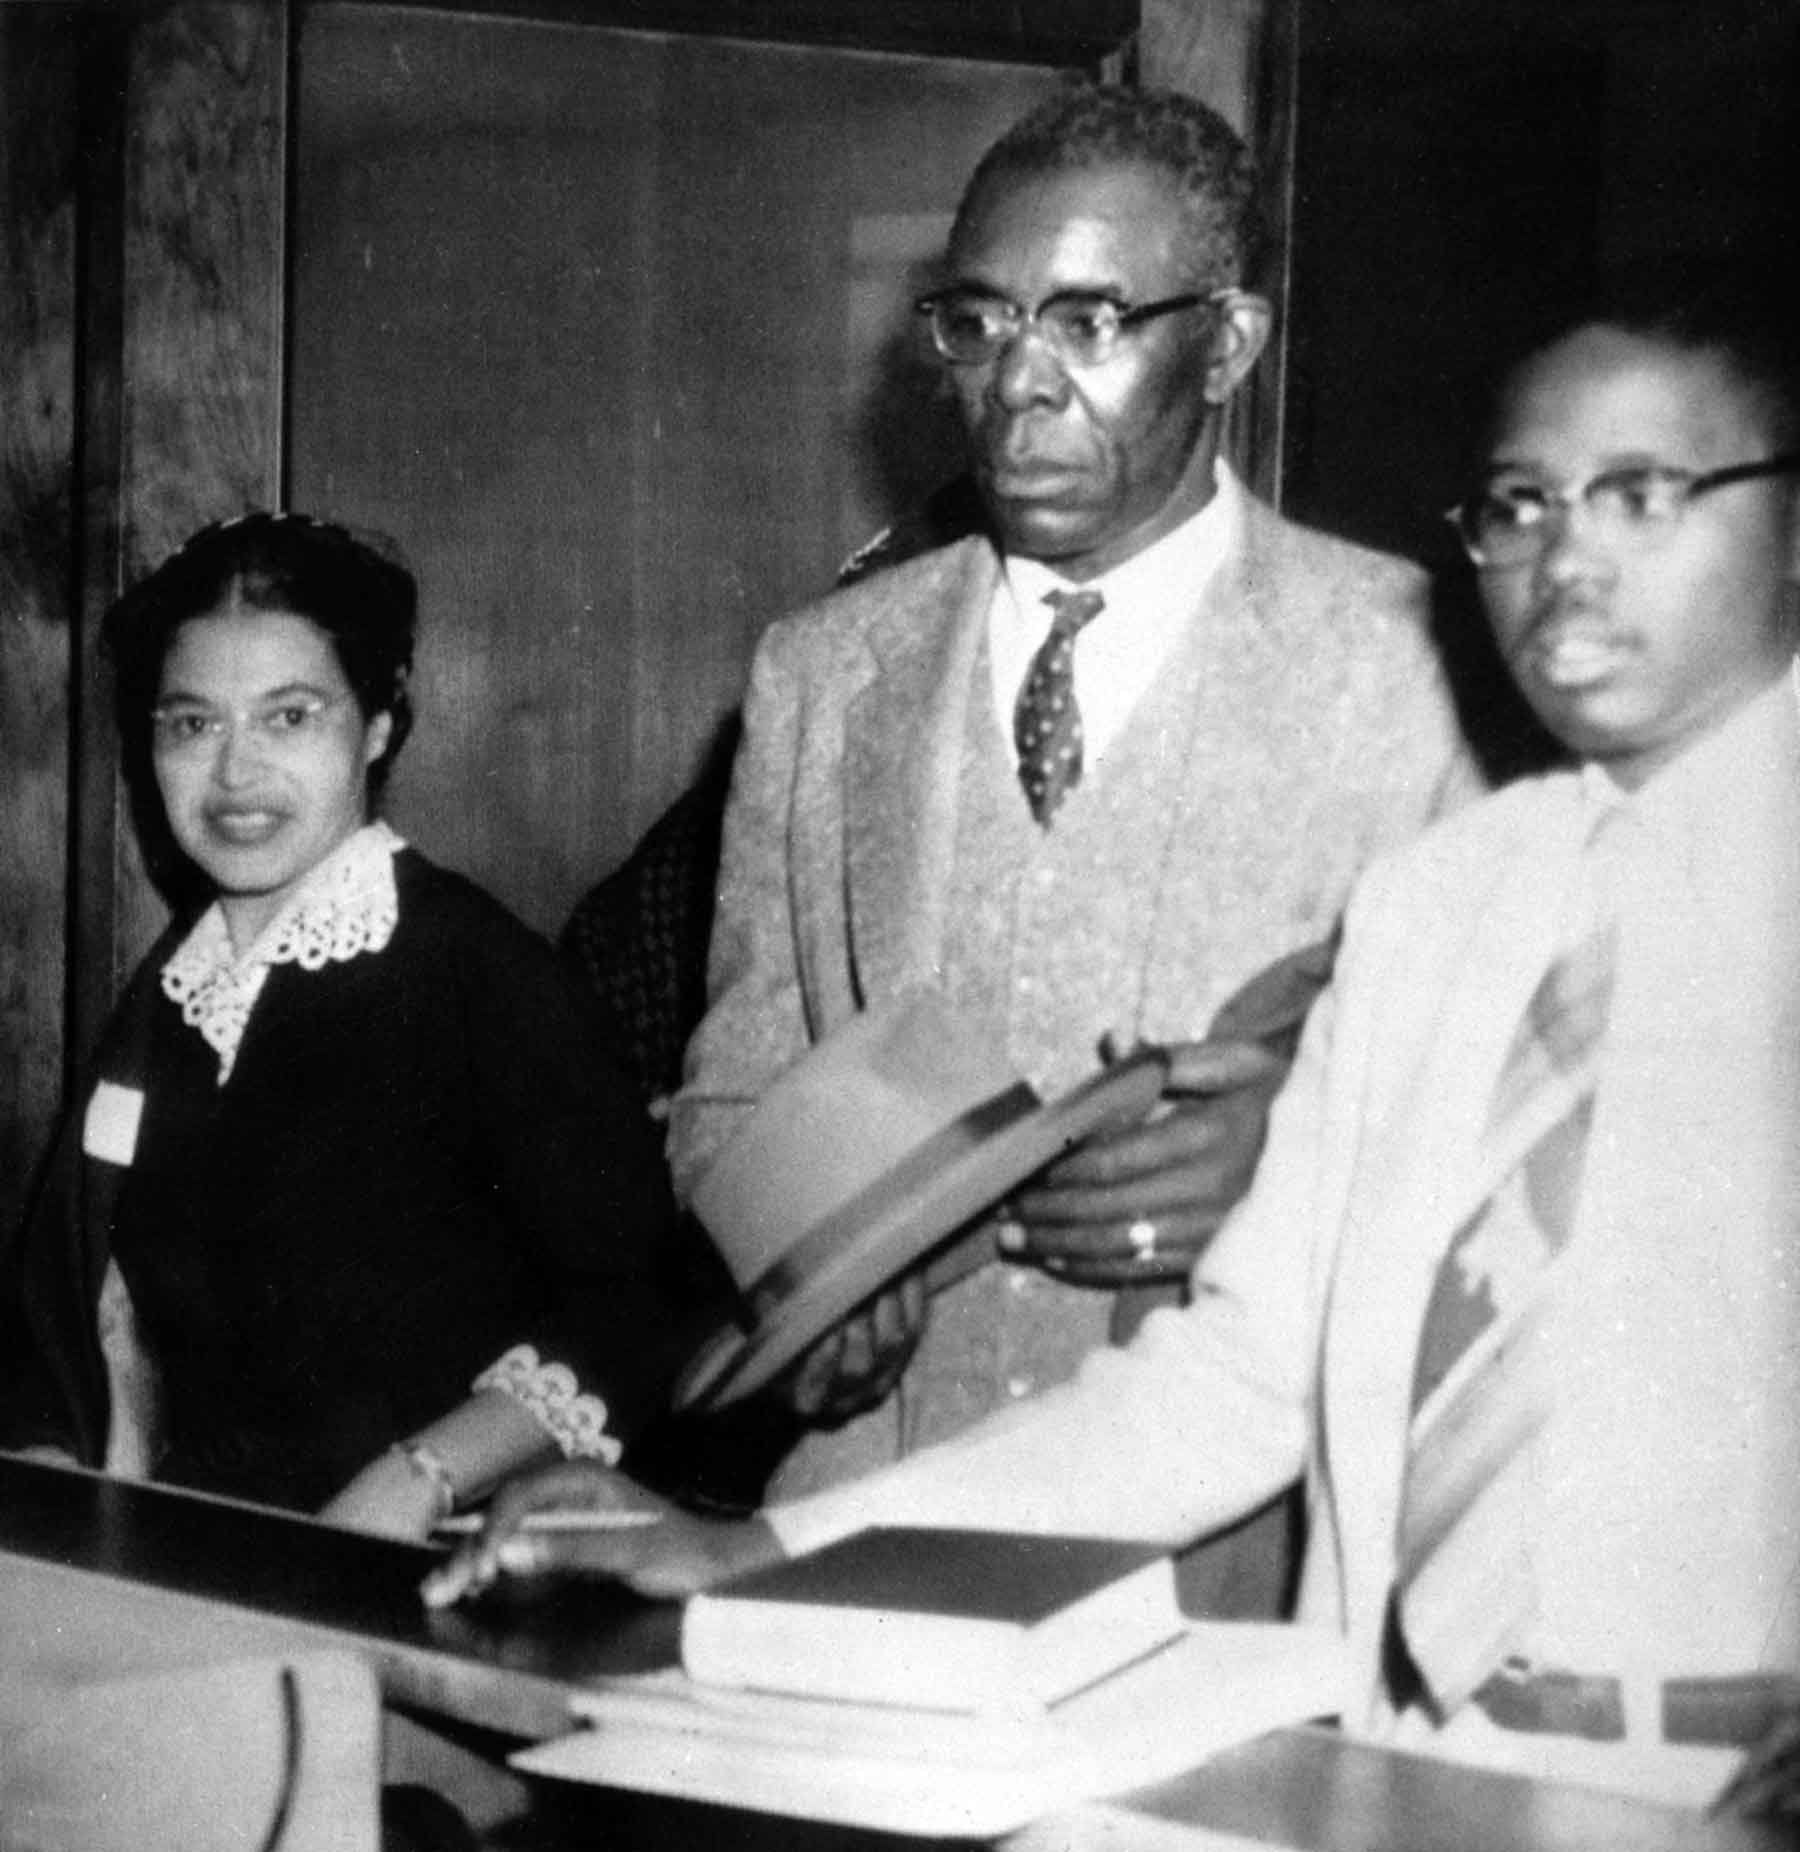 Rosa Parks, E.D. Nixon, and Fred Gray